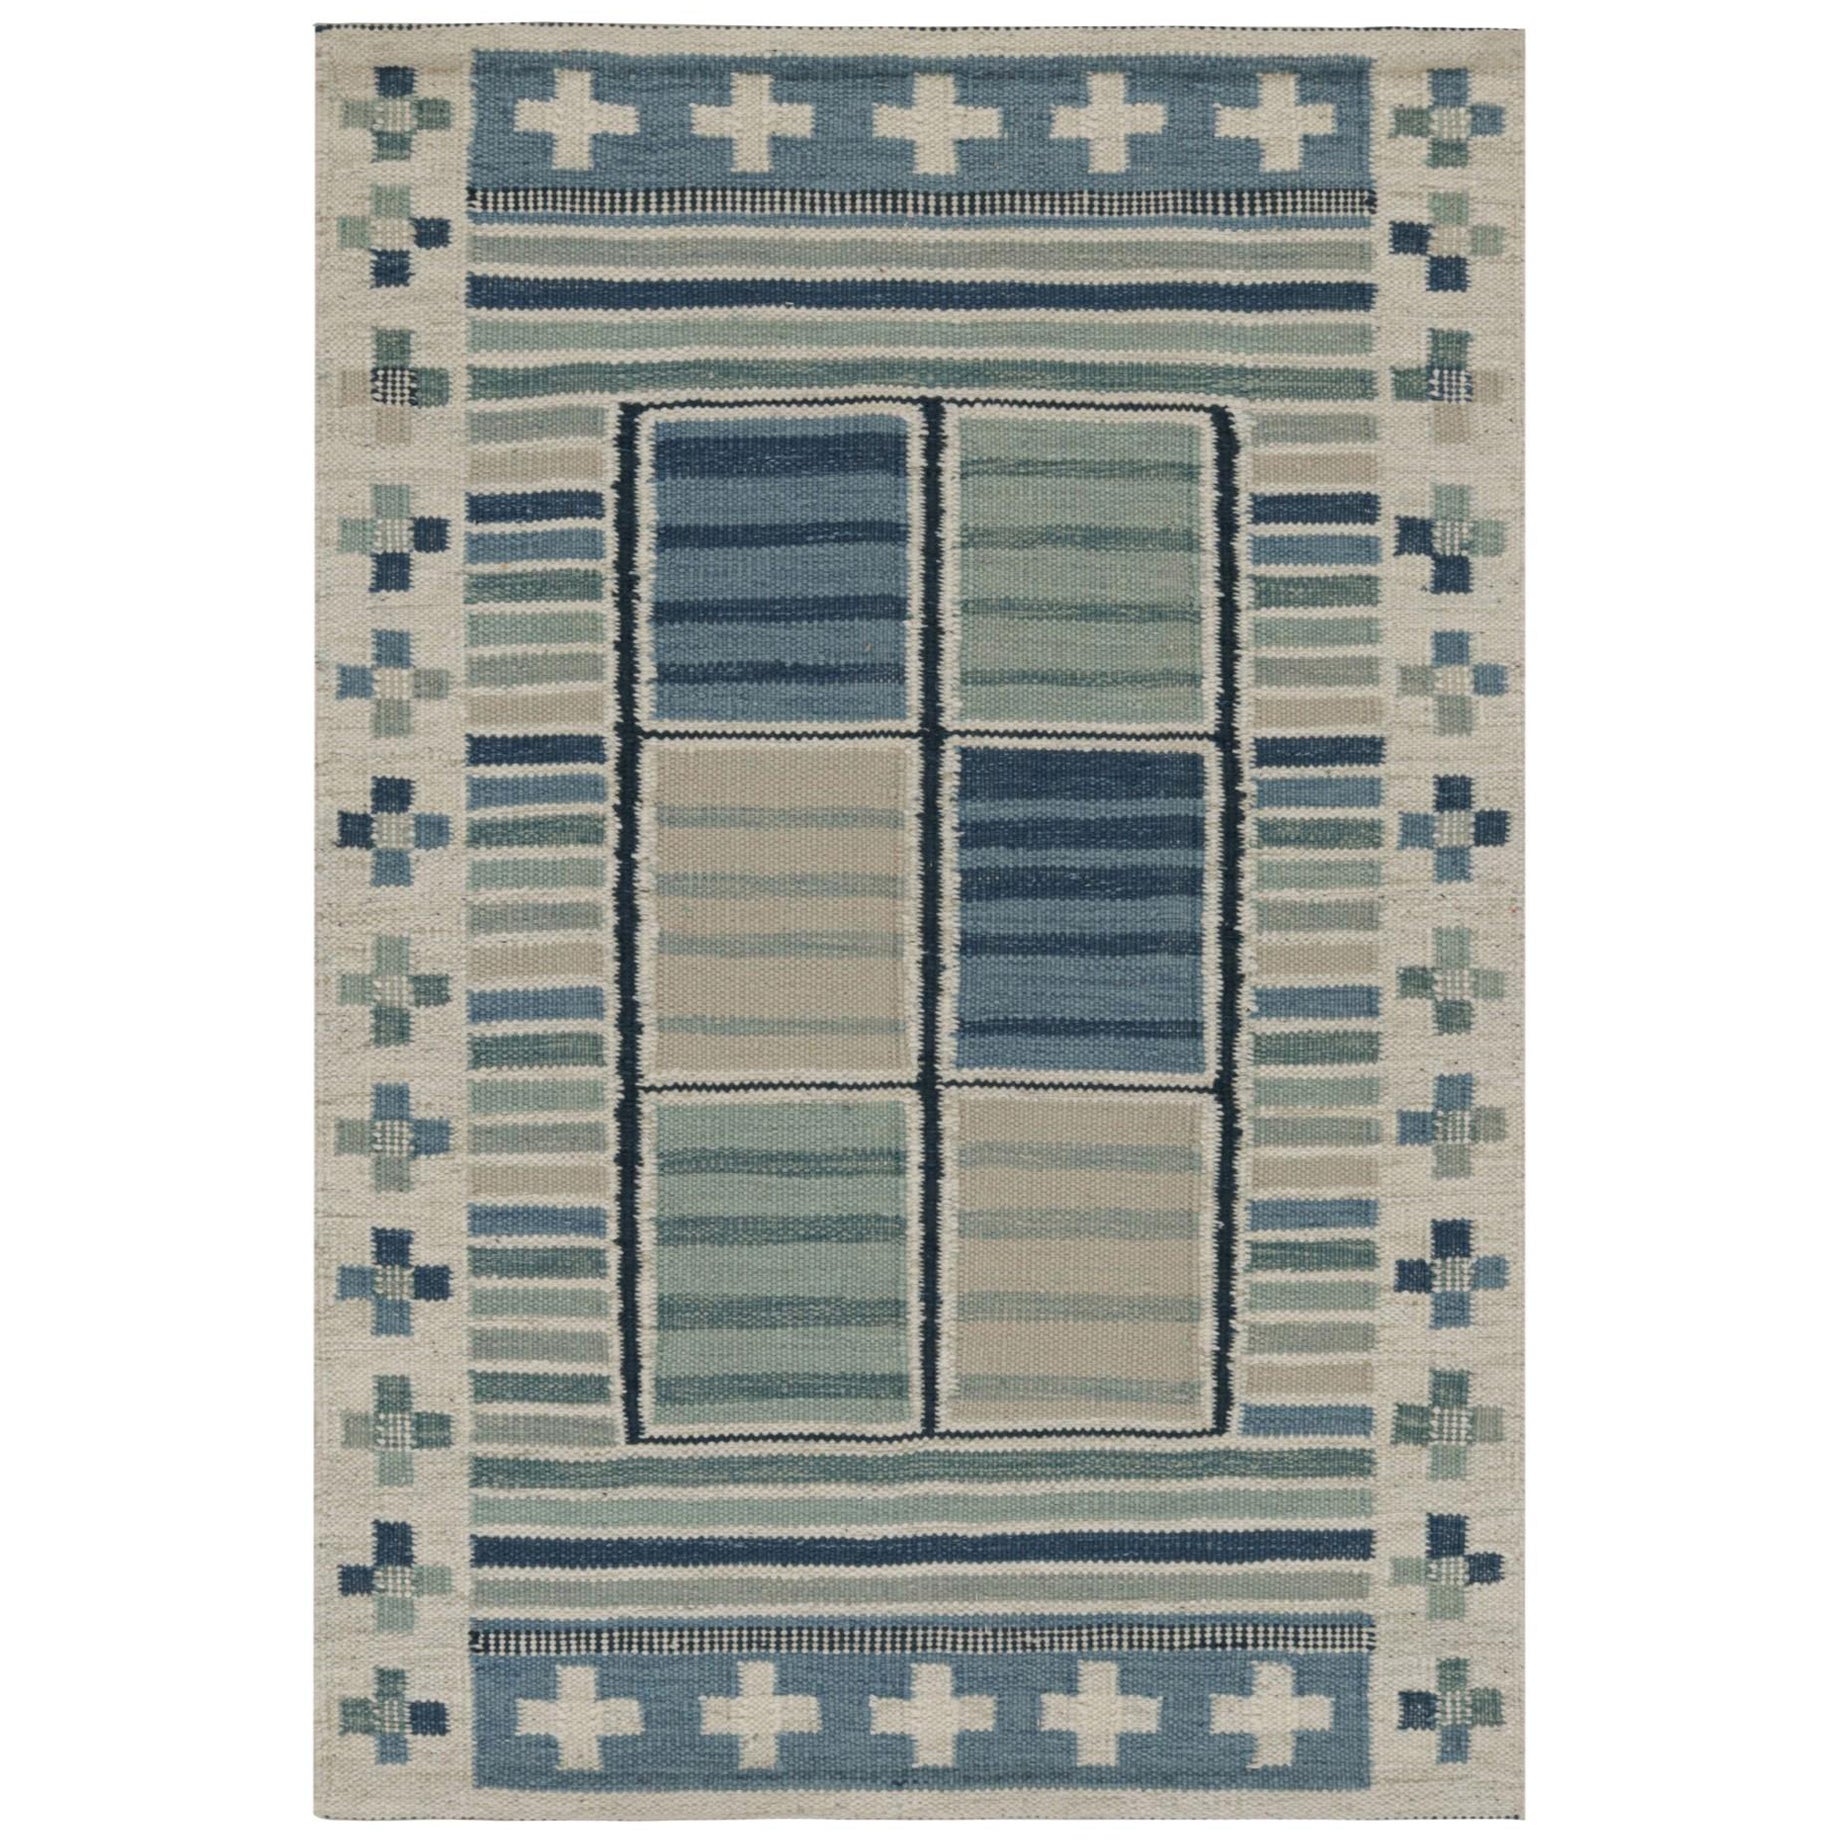 Rug & Kilim’s Scandinavian Kilim and Scatter Rug with Patterns in Cool Blue Tone